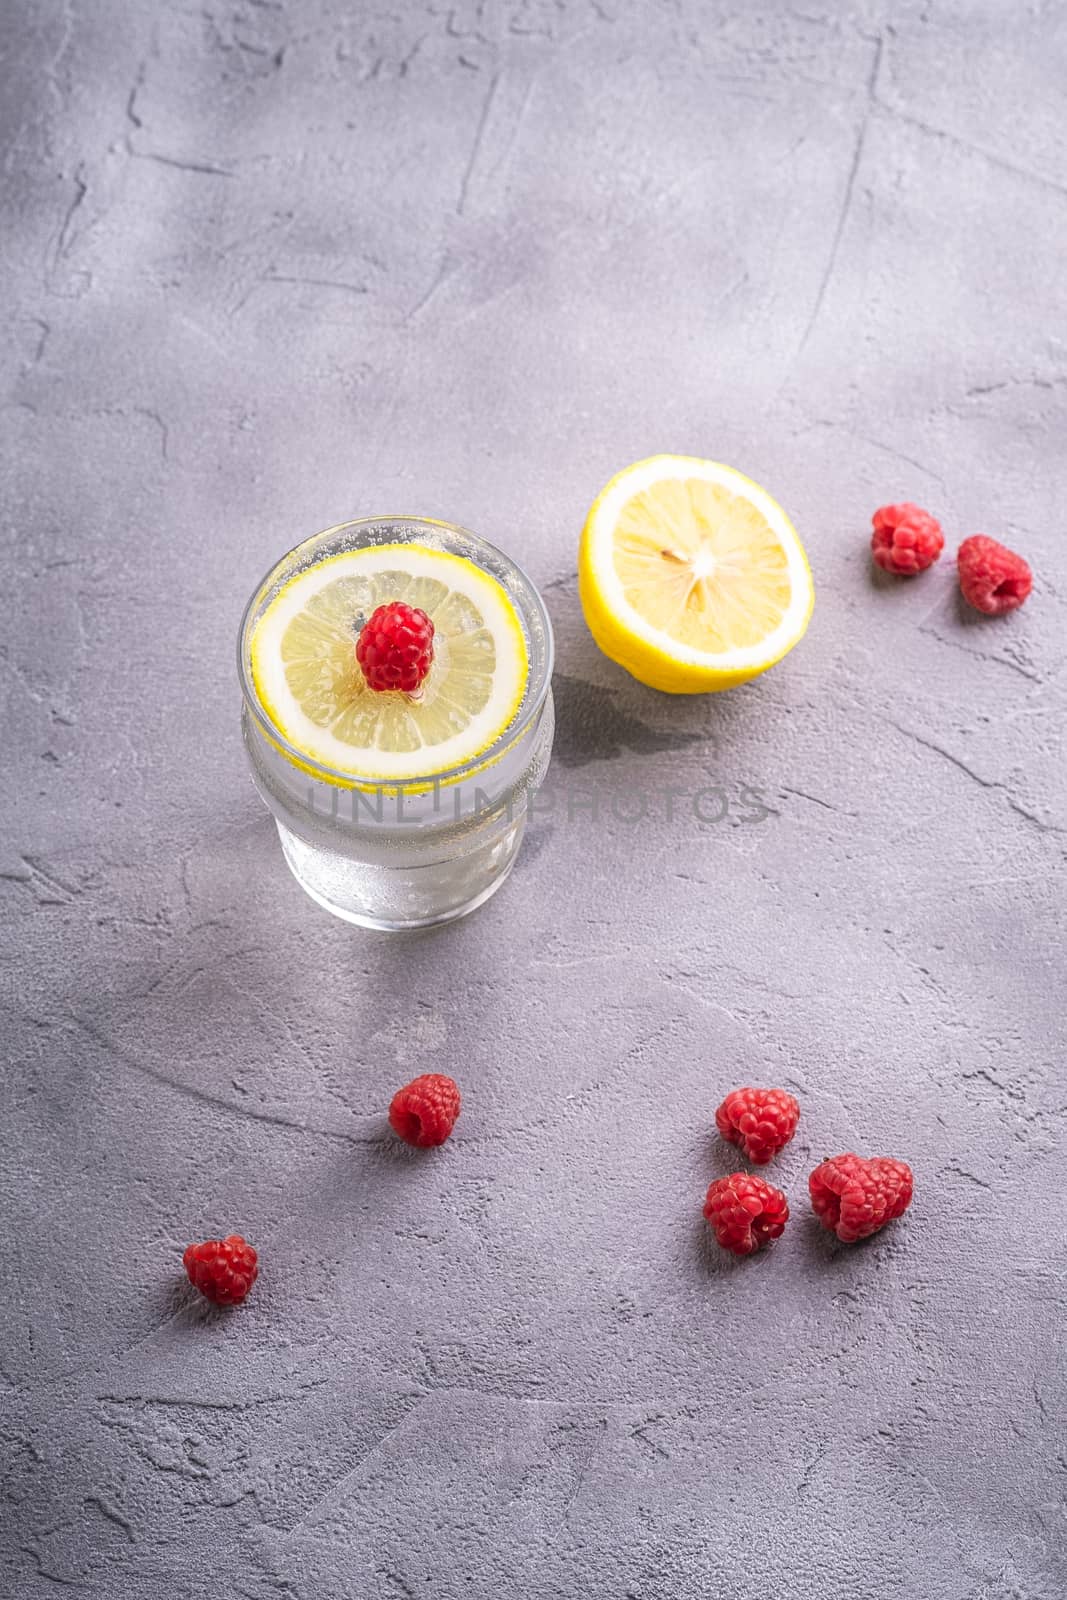 Fresh cold sparkling water drink with lemon, raspberry fruits in glass on stone concrete background, summer diet beverage, angle view selective focus